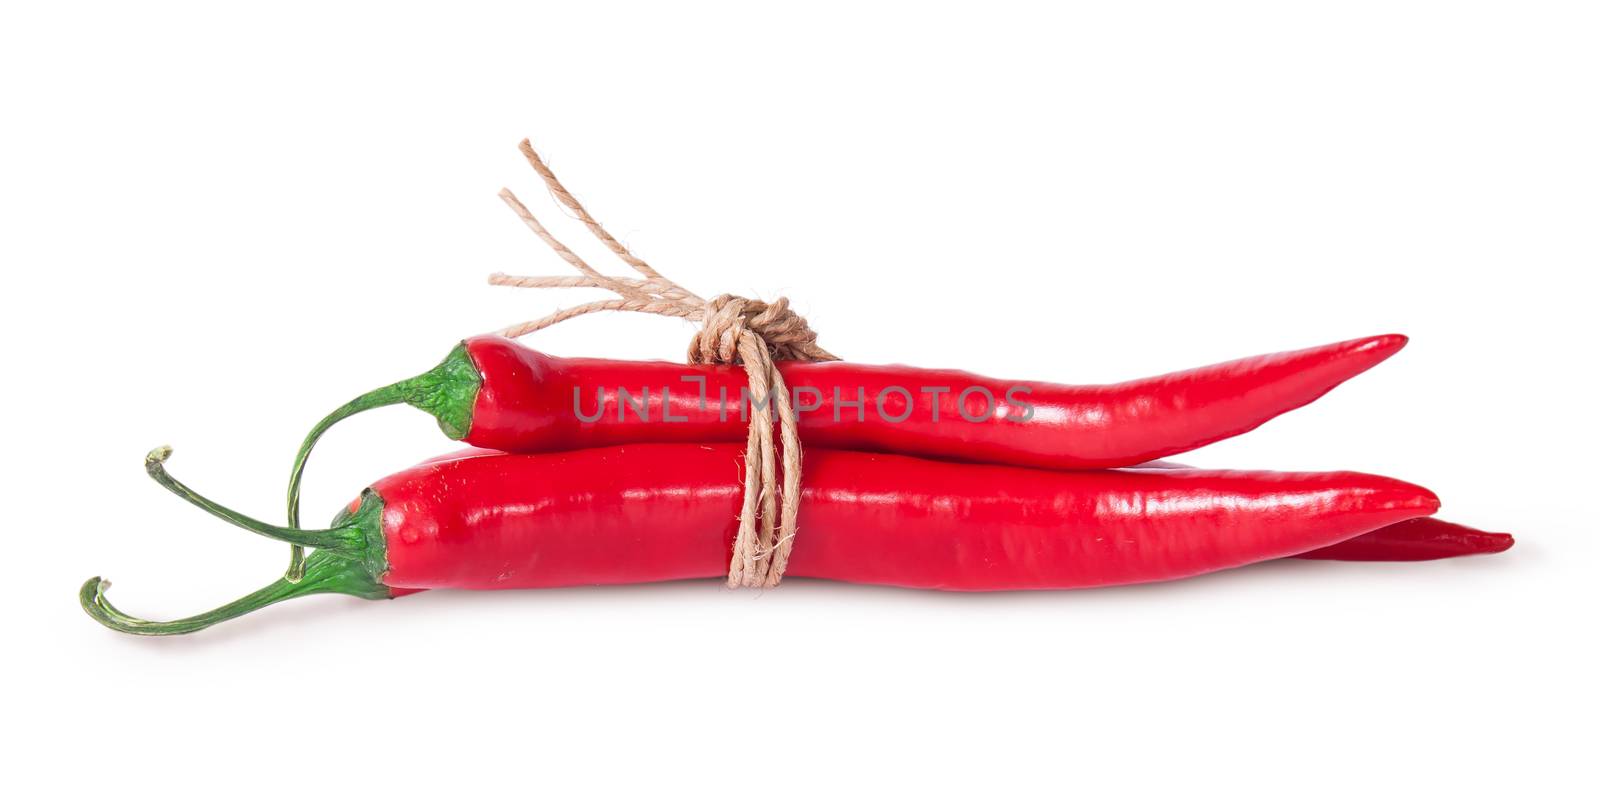 Red chili peppers tied with a rope isolated on white background